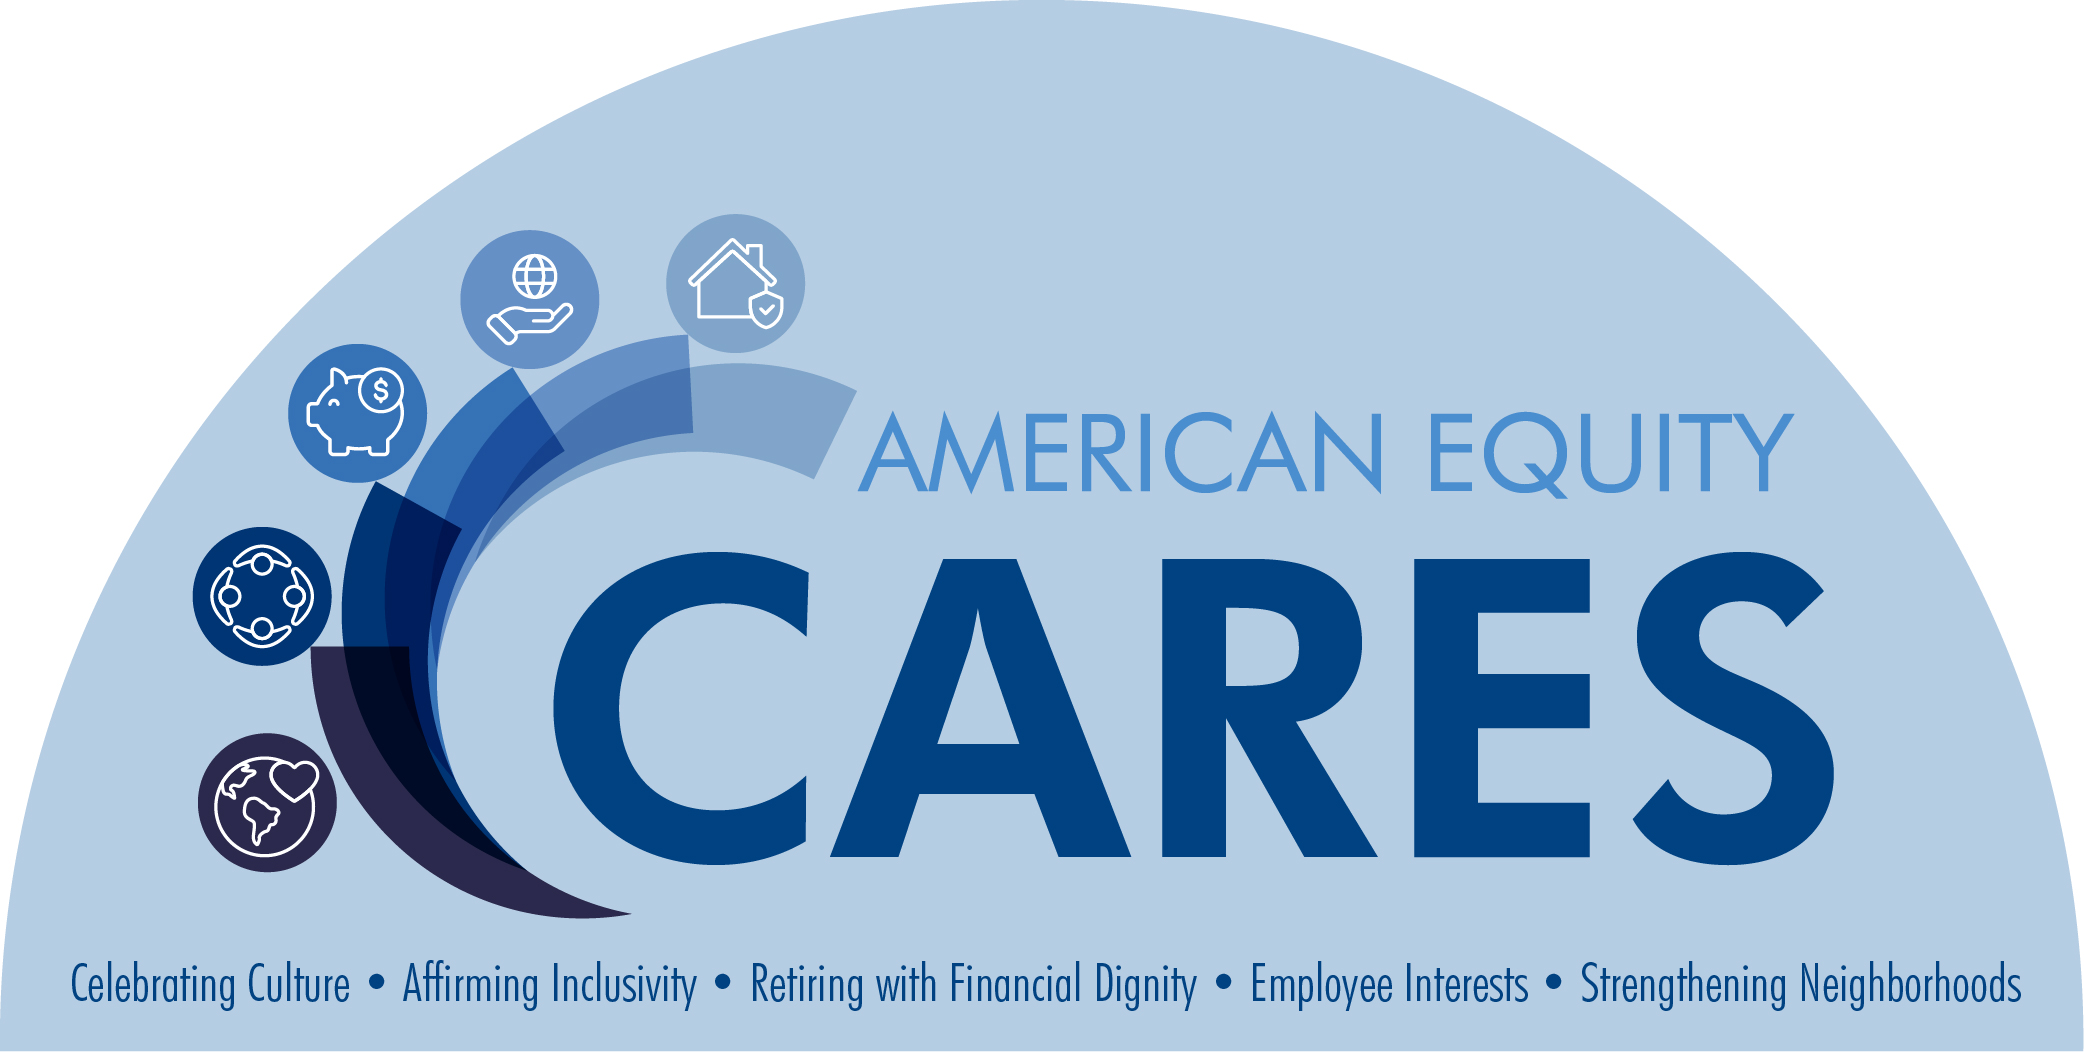 American Equity CARES